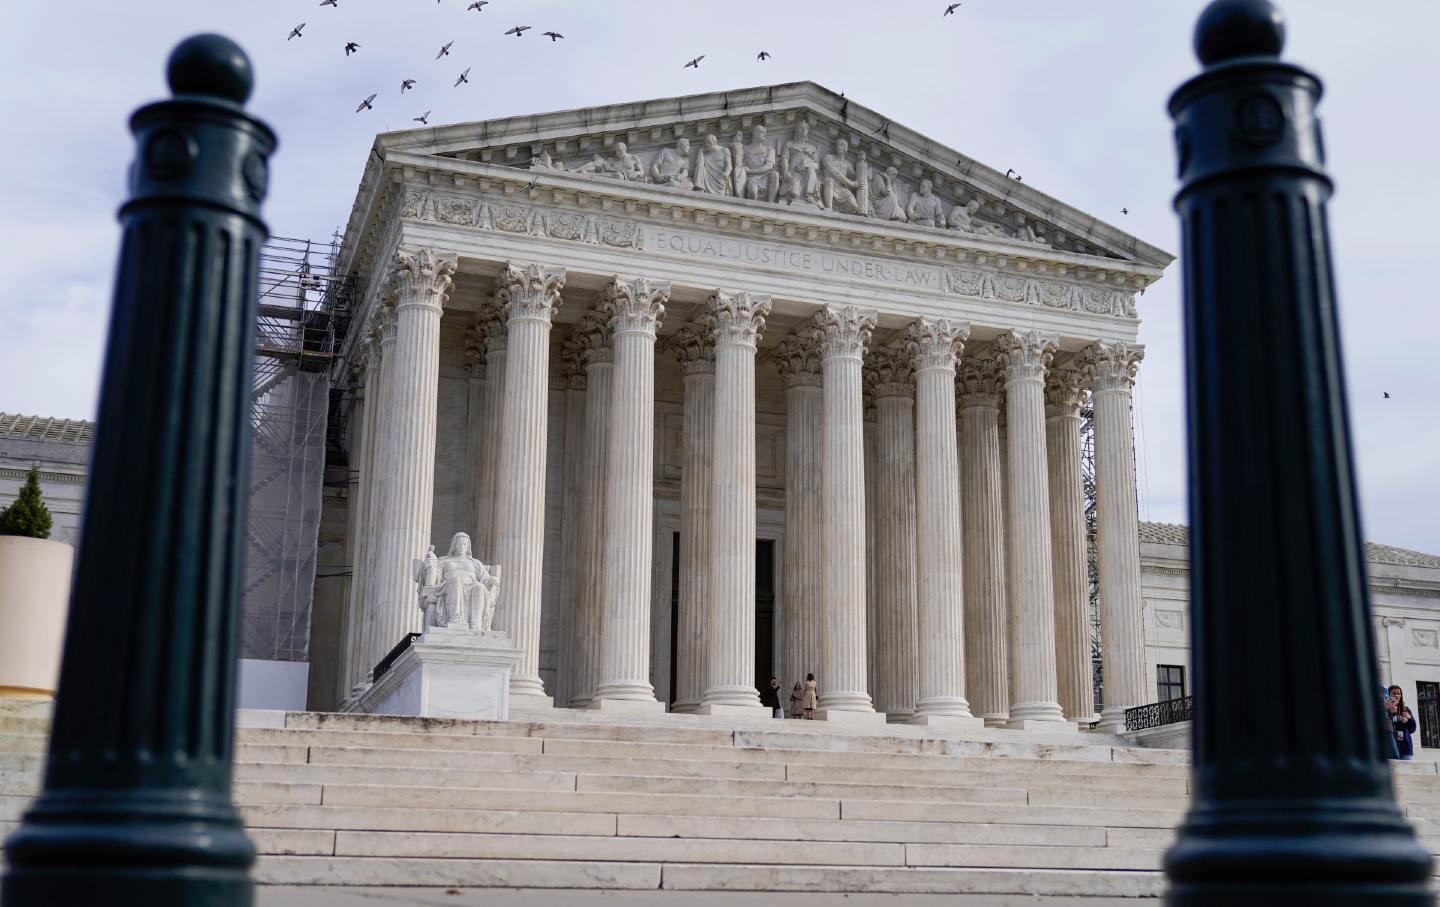 The US Supreme Court Building.